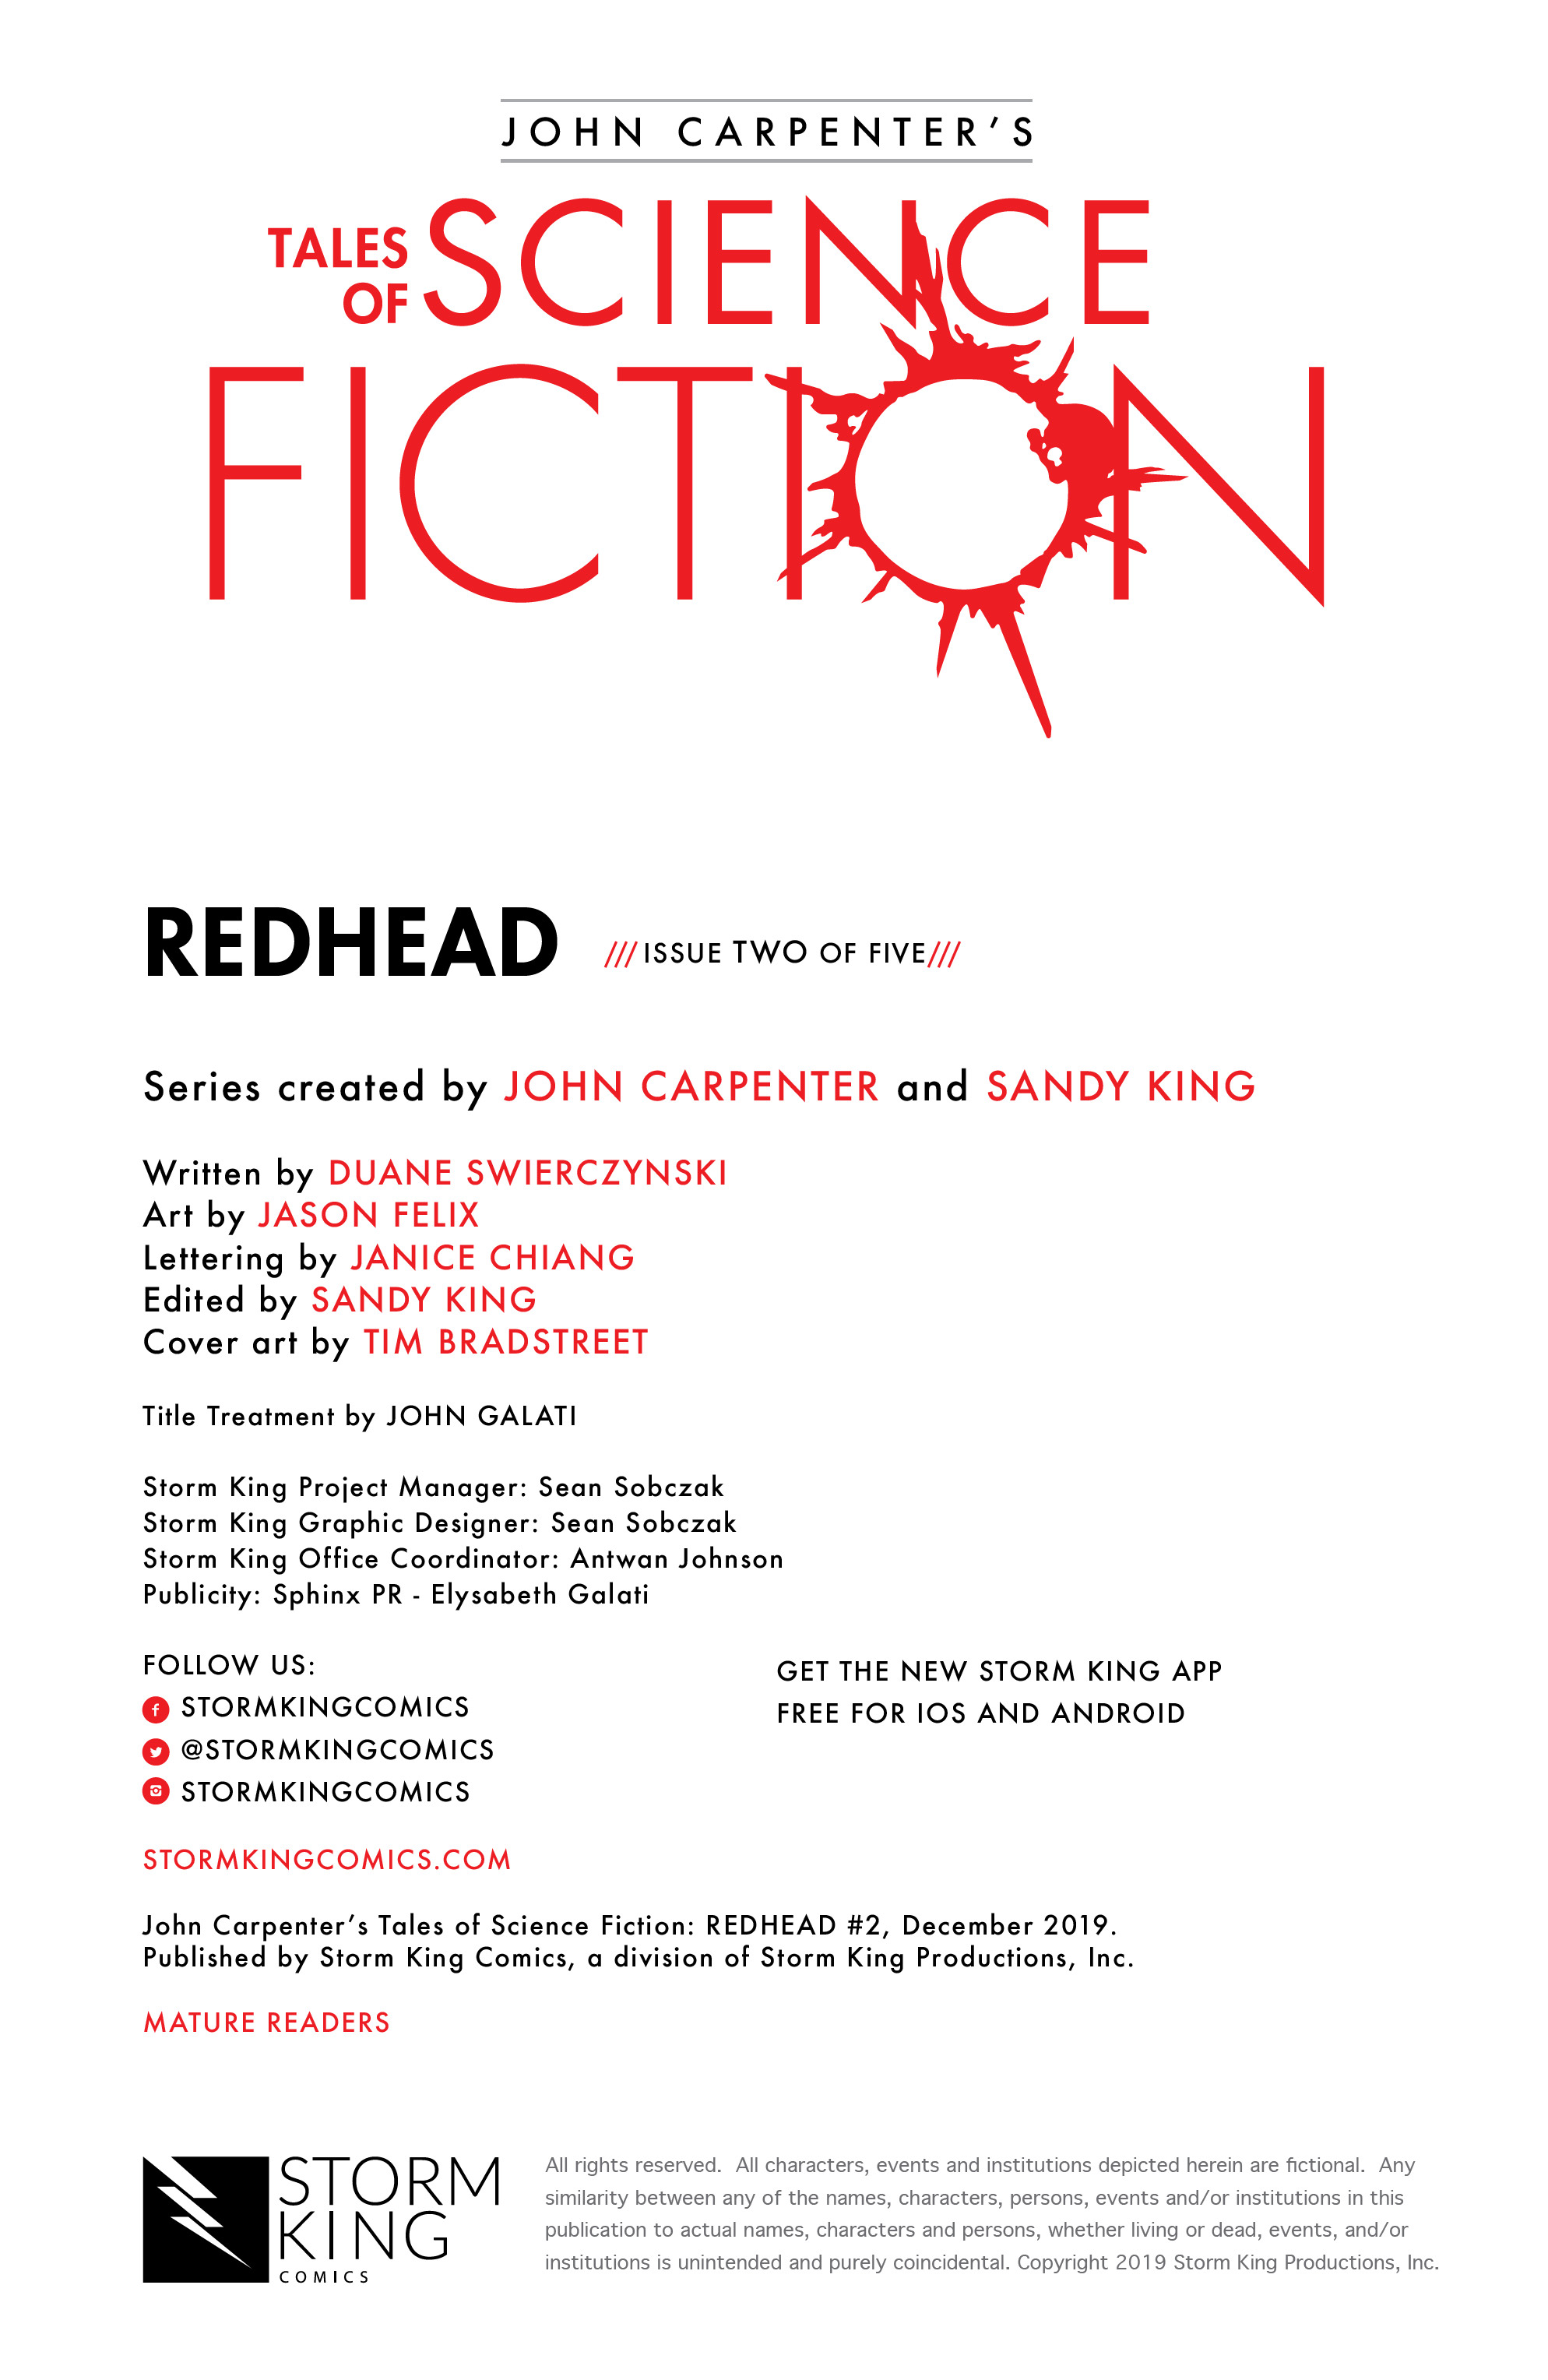 Read online John Carpenter's Tales of Science Fiction: Redhead comic -  Issue #2 - 2